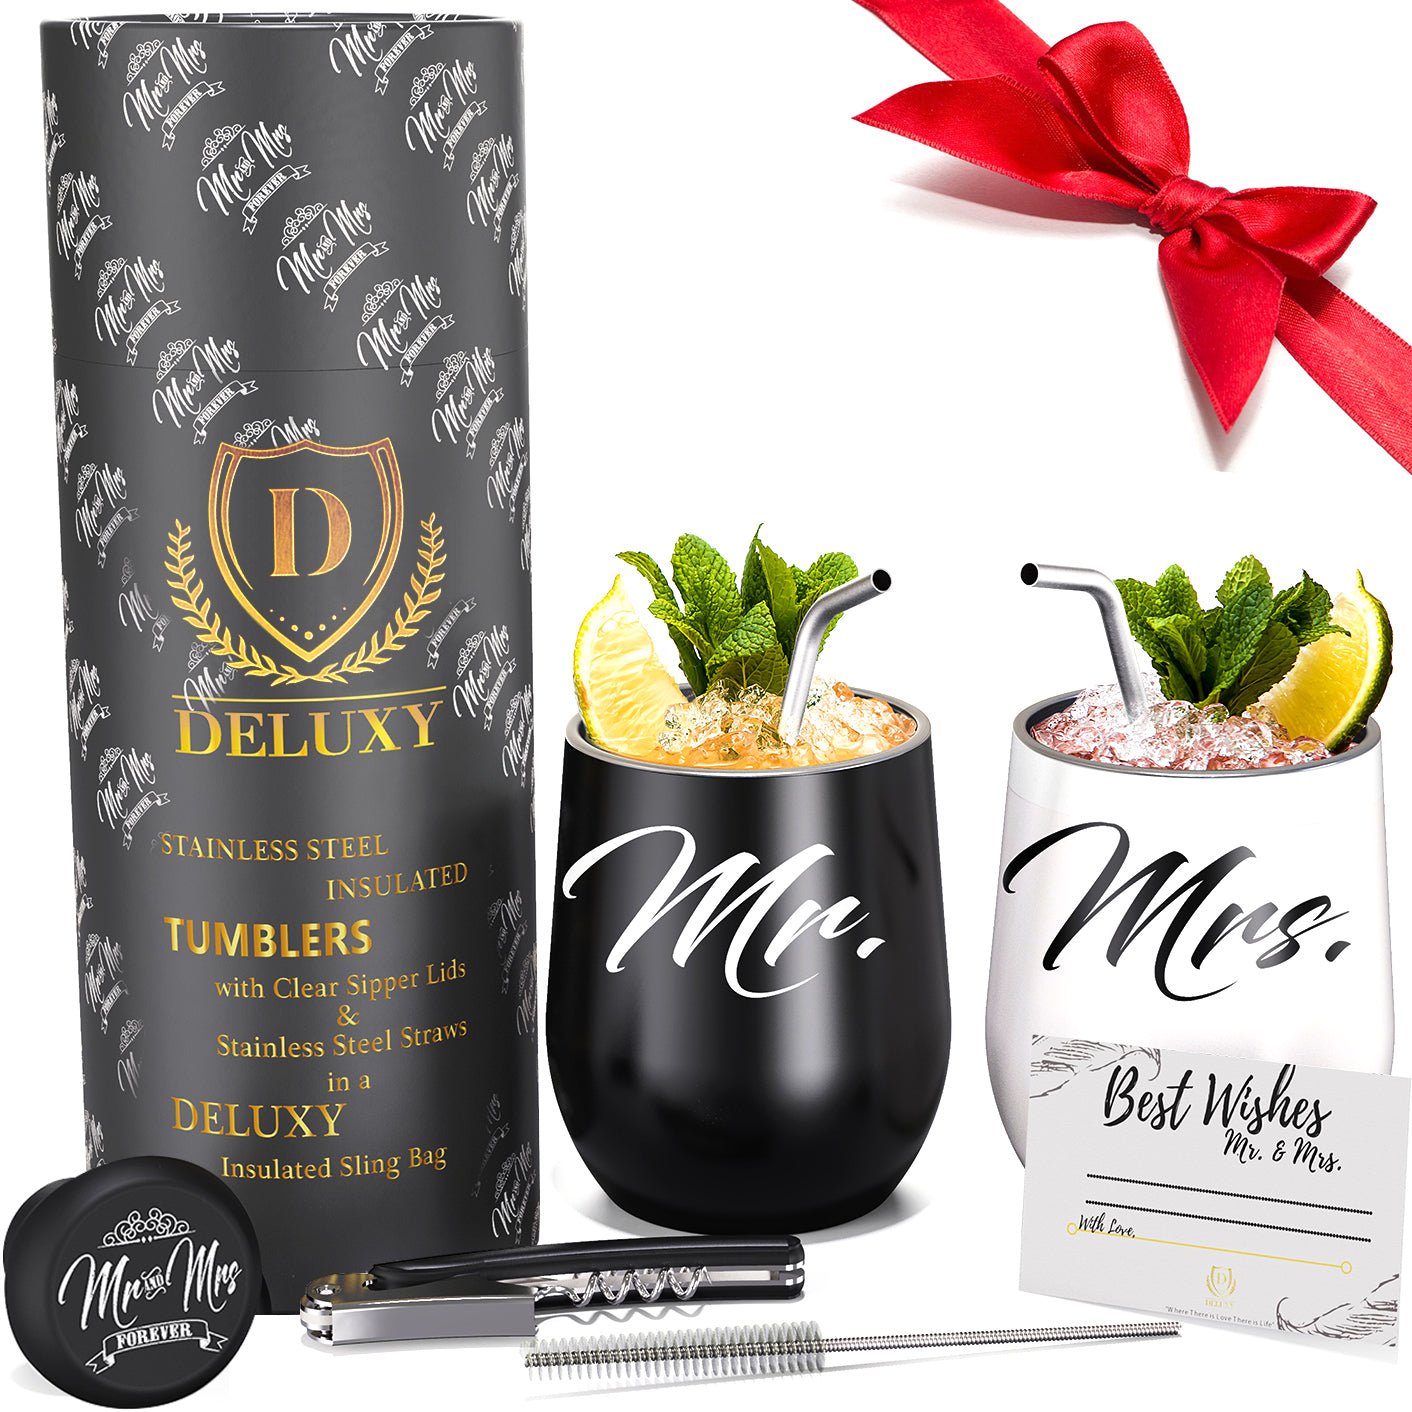 Deluxe Wine Lovers Gift Set - Tumbler, Gourmet Slush Mix, Candle, and Wine  Gummies